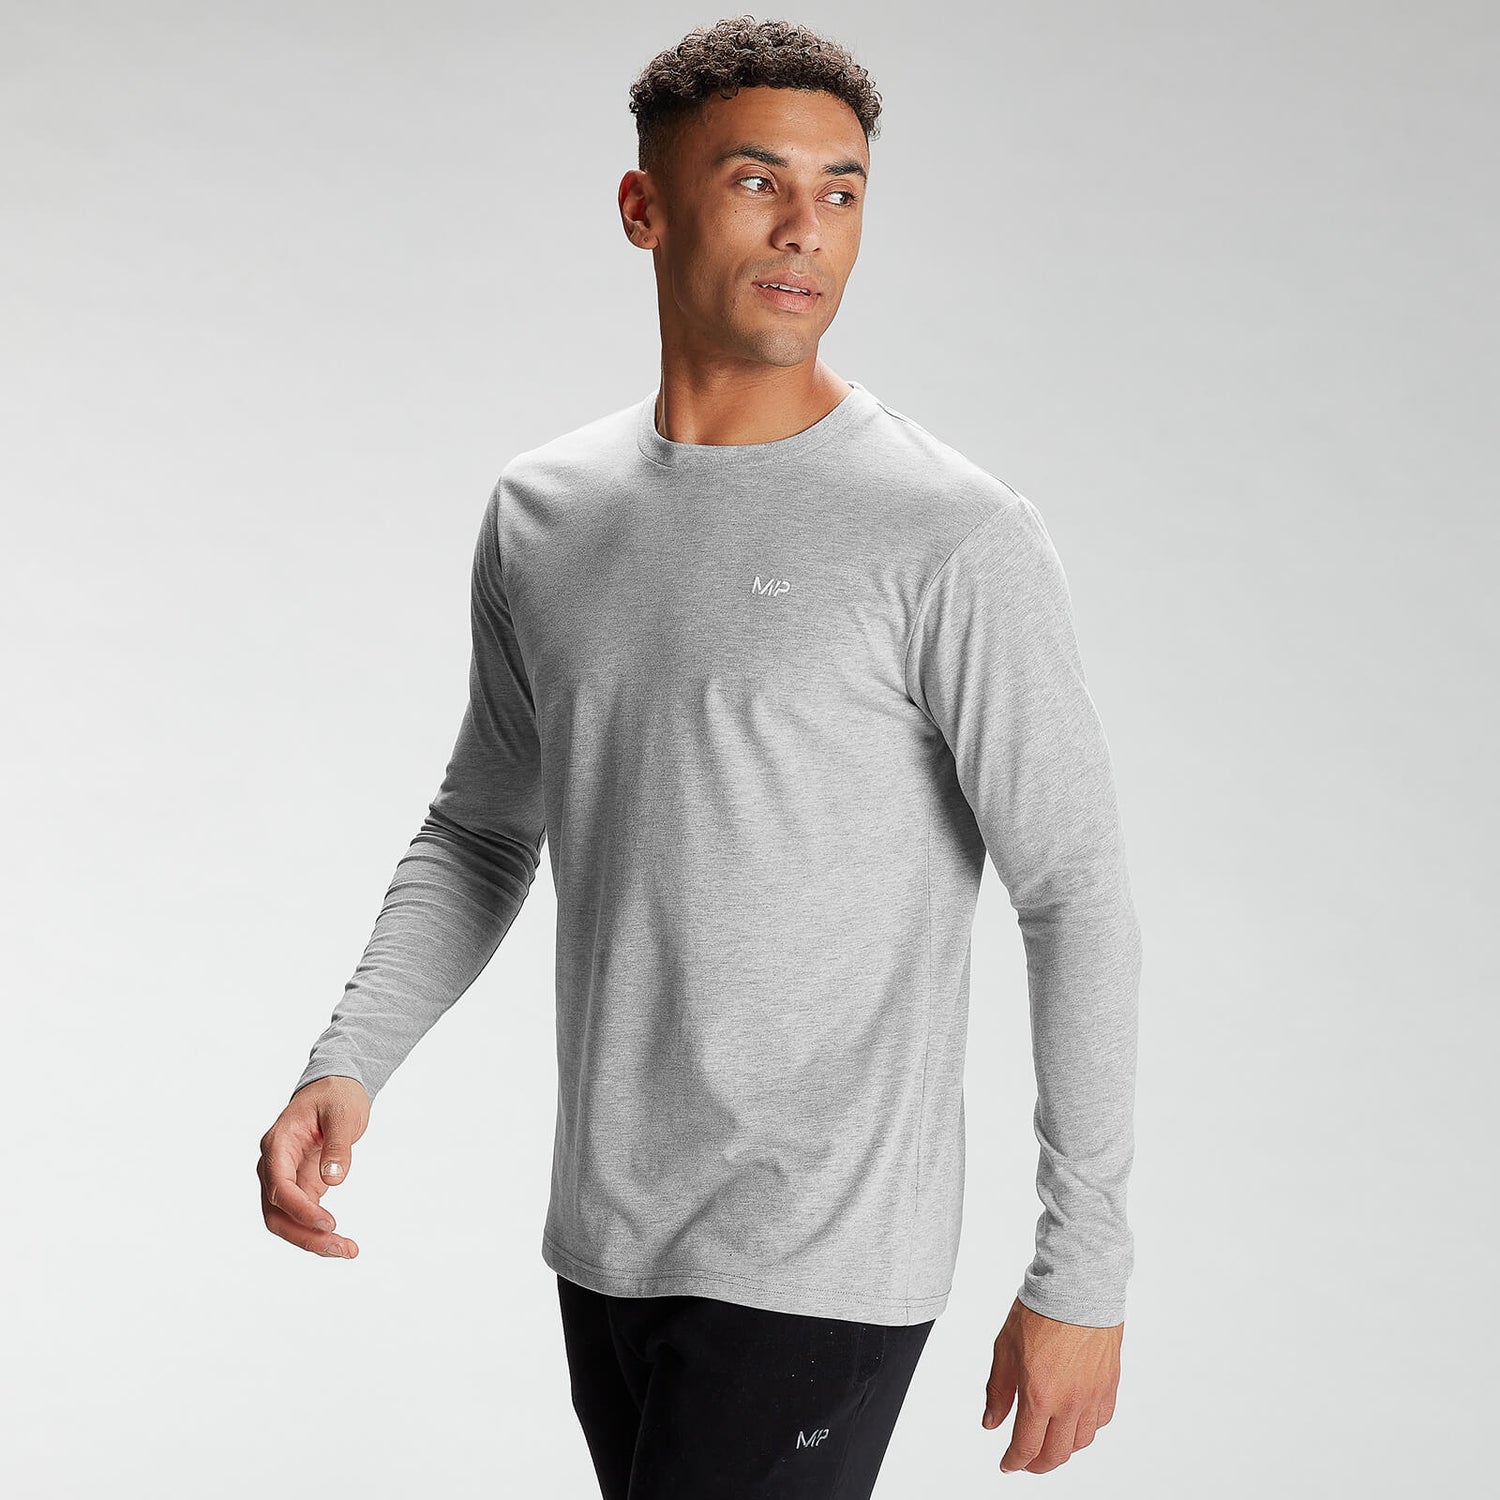 MP Men's Rest Day Long Sleeve Top - Classic Grey Marl - XS